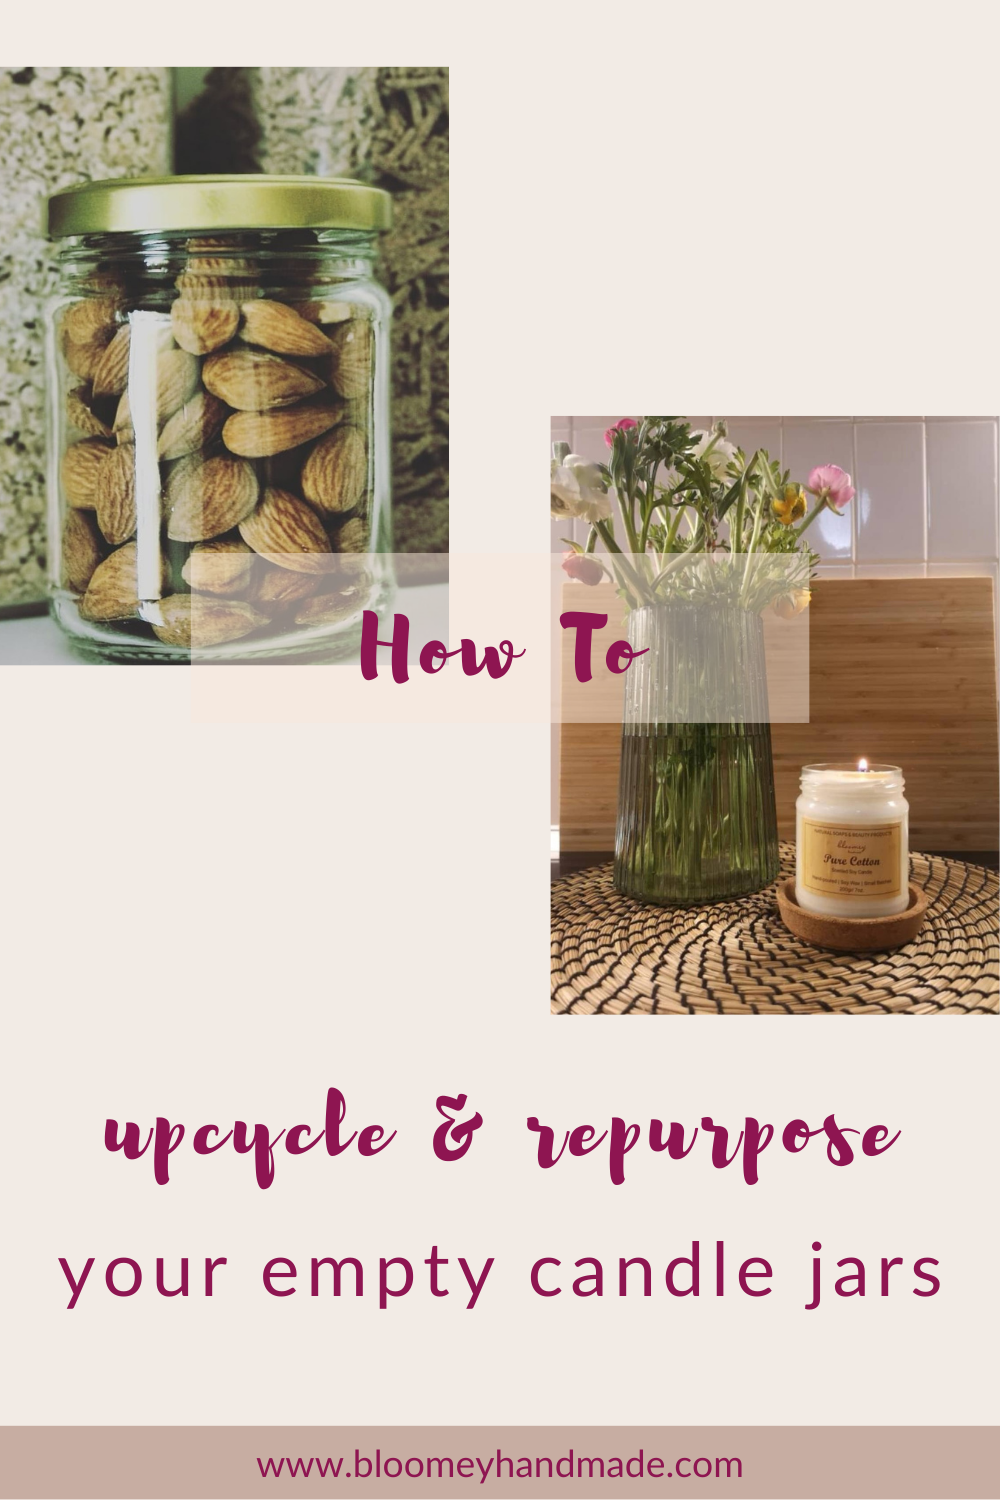 How to Upcycle Candle Jars